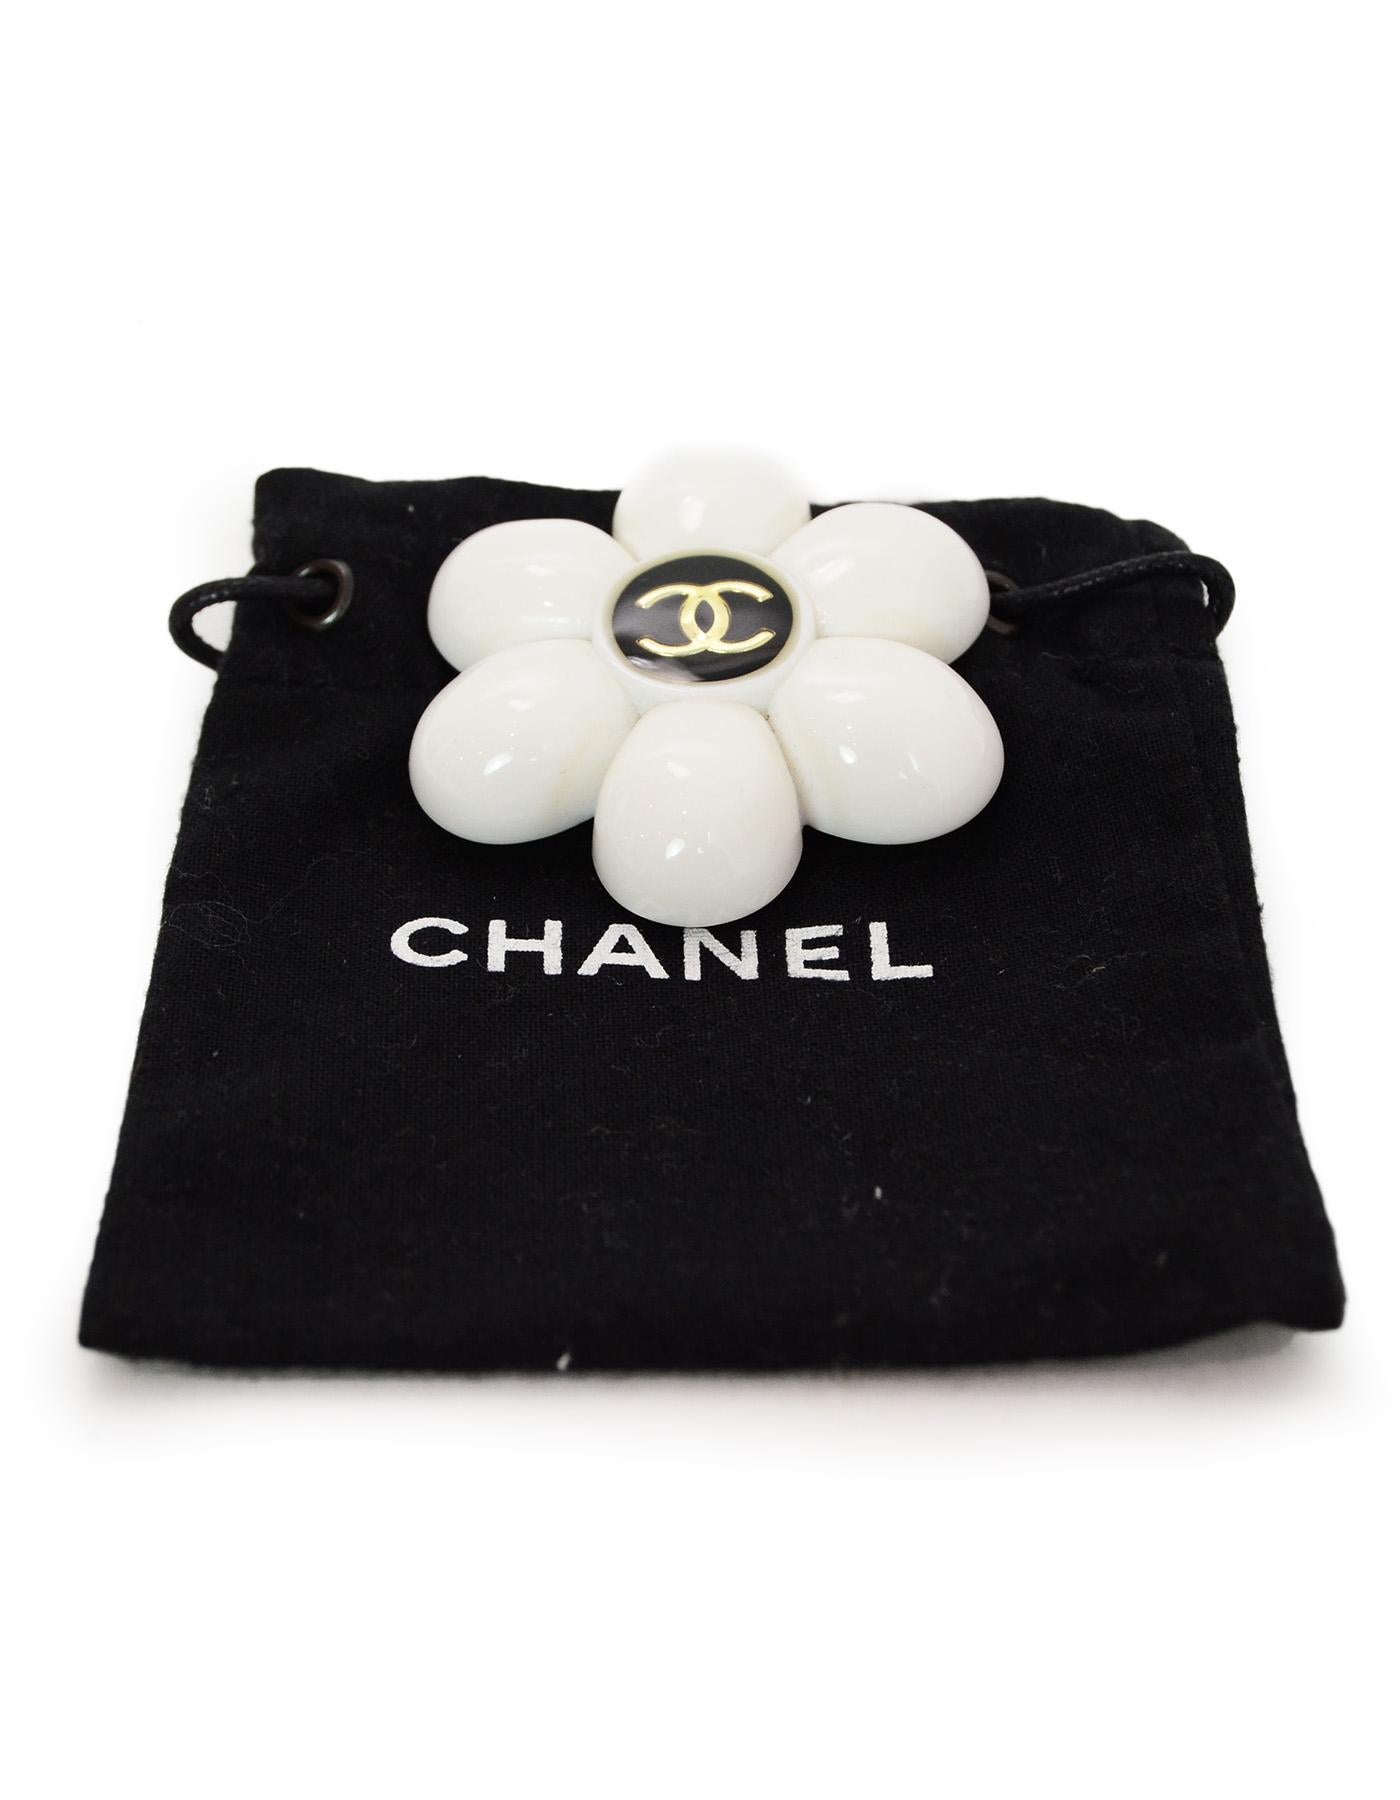 Chanel Vintage '96 CC White Daisy Flower Brooch/Pin

Made In: France
Year of Production: 1996
Color: White, black and gold
Materials: Plastic and metal
Hallmarks: 